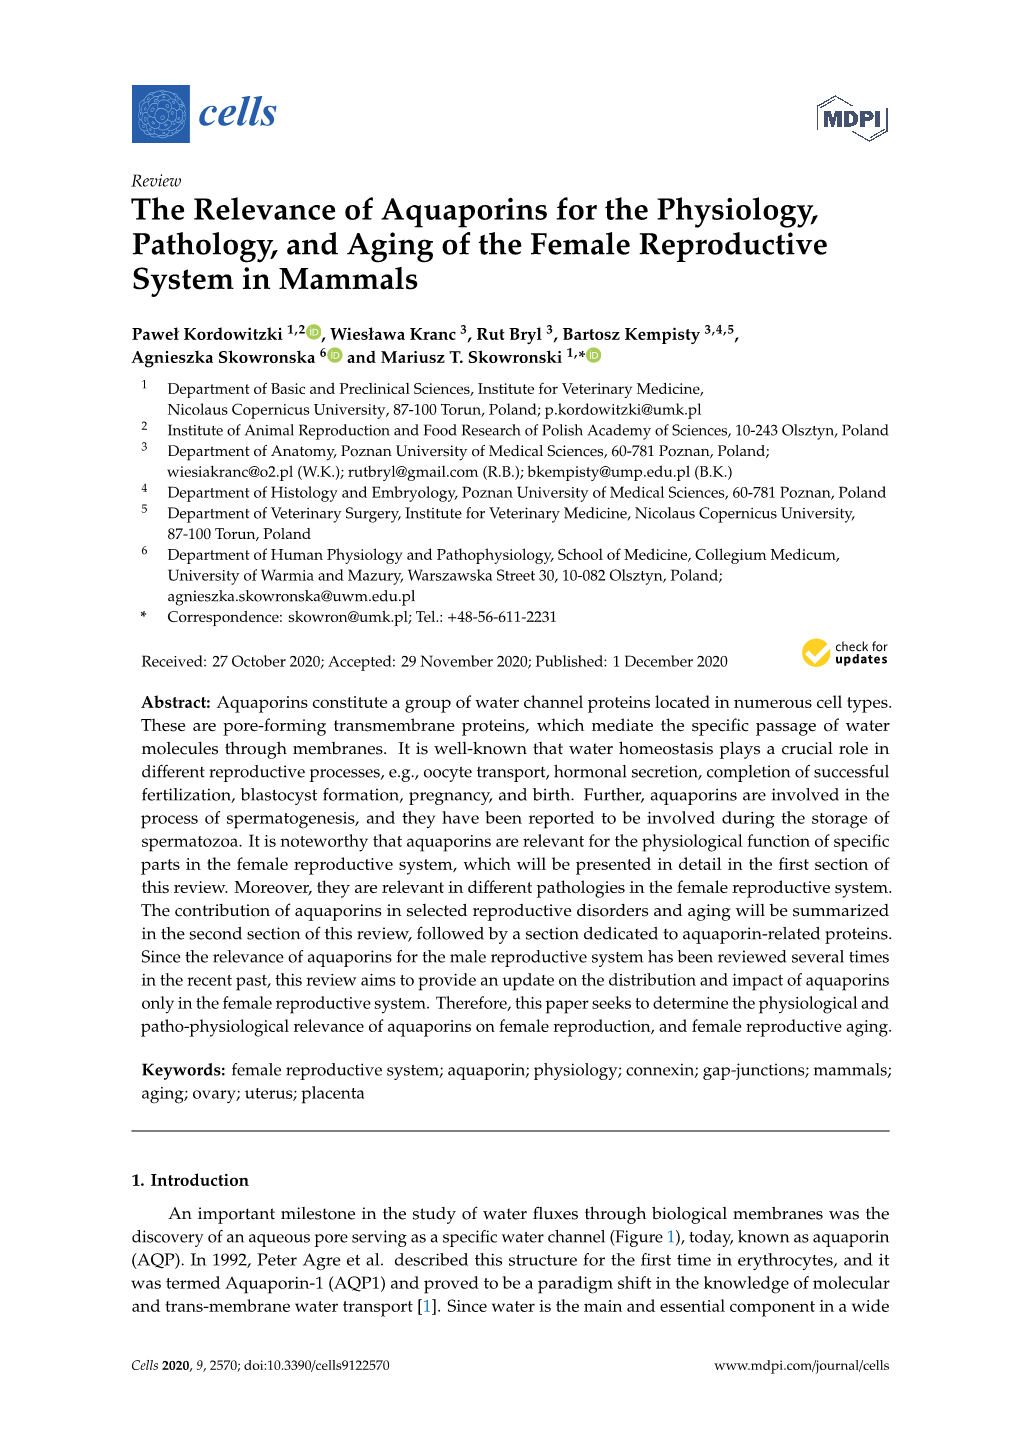 The Relevance of Aquaporins for the Physiology, Pathology, and Aging of the Female Reproductive System in Mammals